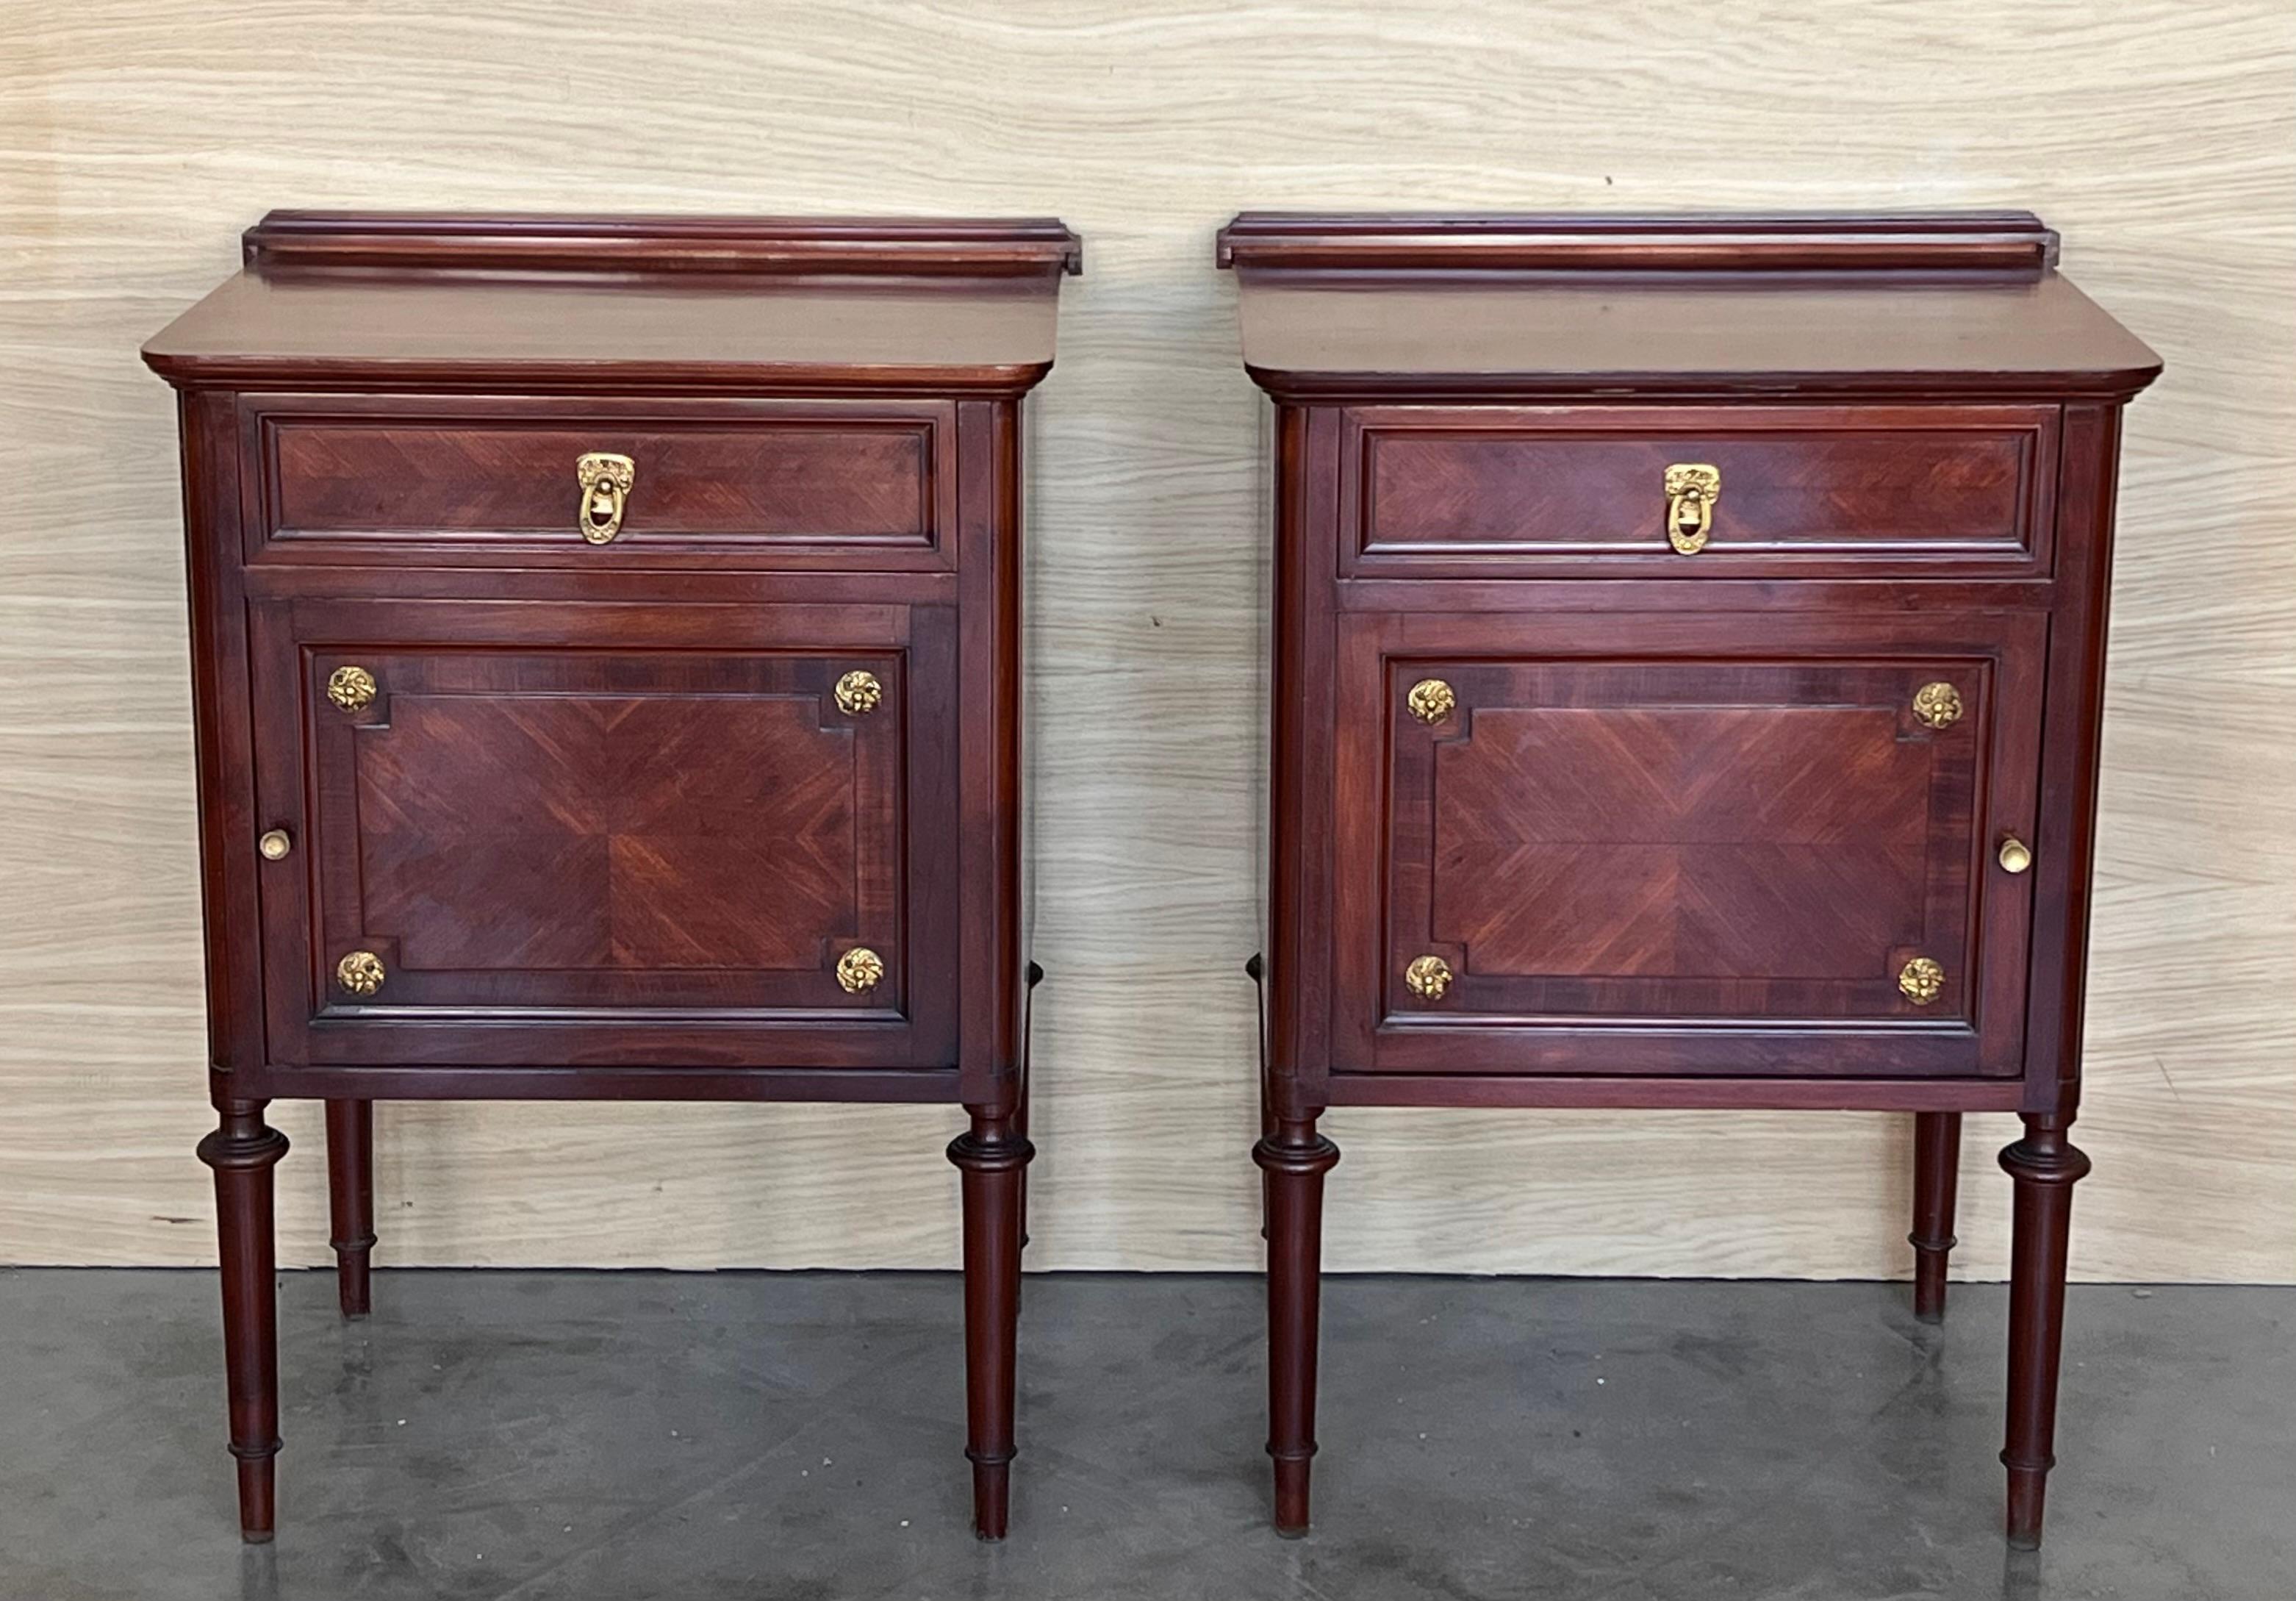 A 19th century French Louis XVI style mahogany side tables, or nightstands, with a fine crest that you can remove.  One dovetailed drawer above cabinet doors. Made of inlaid veneer of mainly mahogany. Slender legs. In excellent condition with only